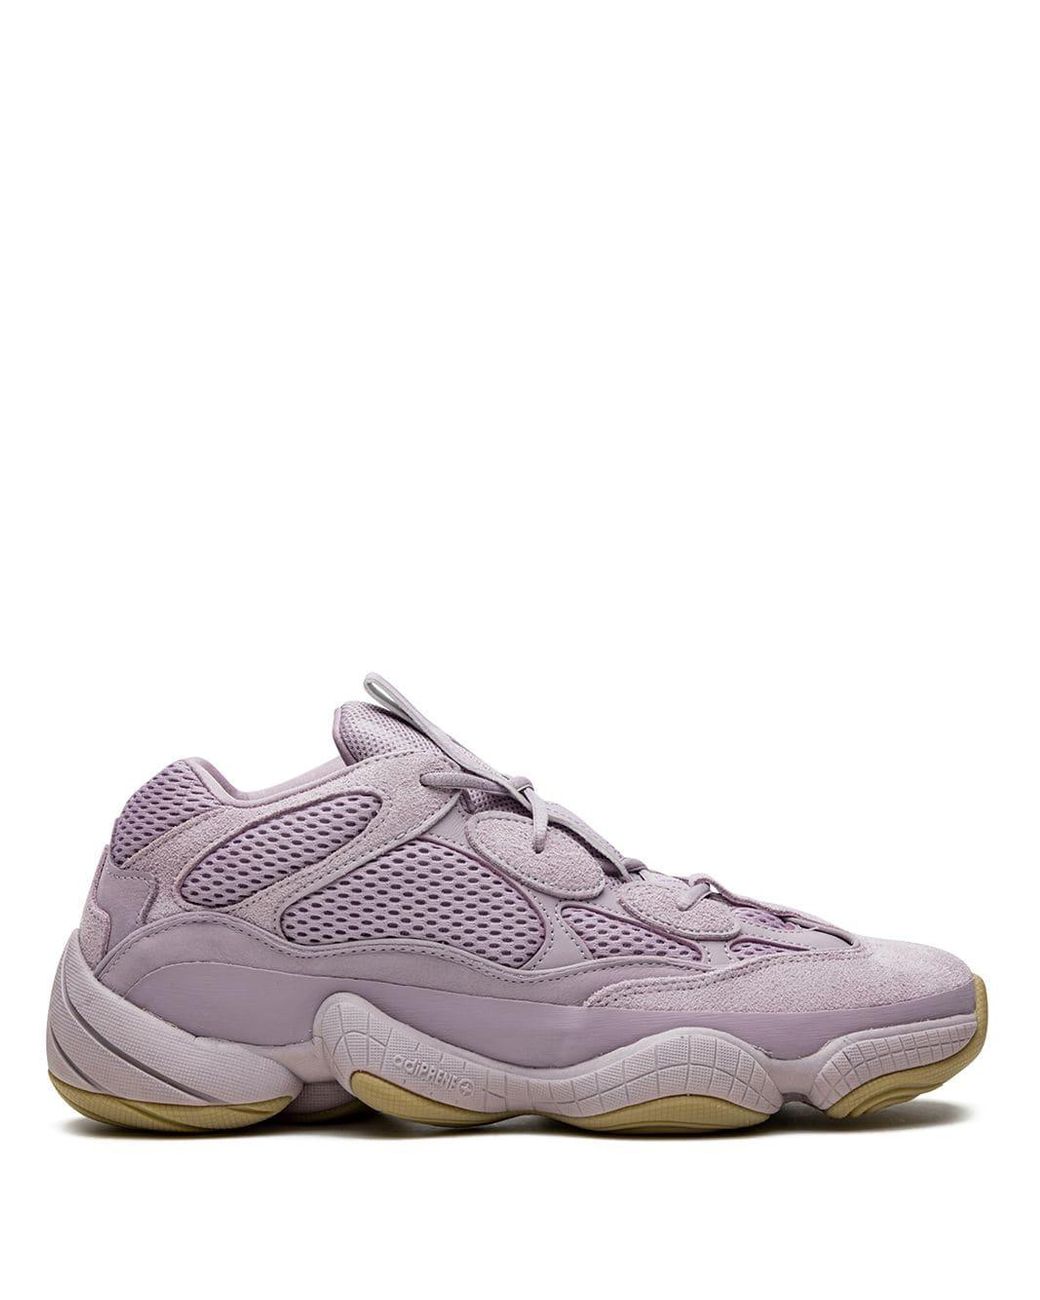 Yeezy Leather Yeezy 500 "soft Vision" Sneakers in Purple - Lyst